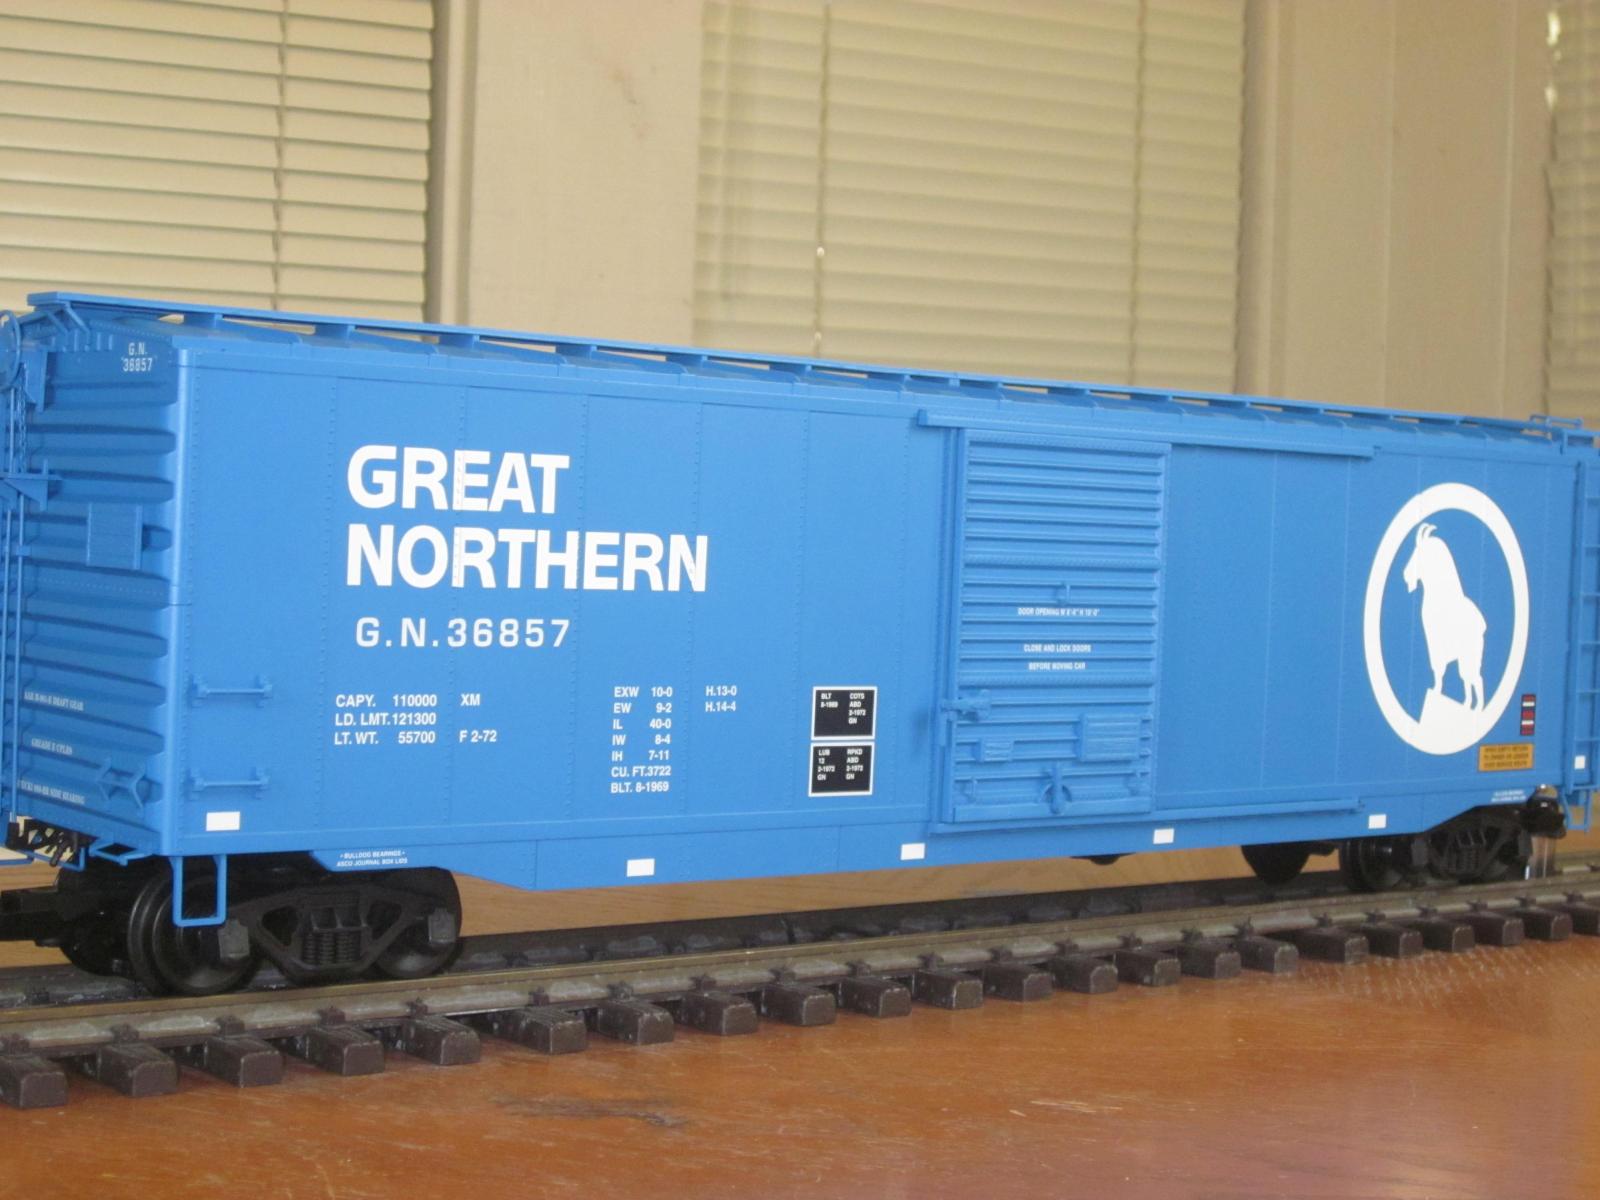 R19305A Great Northern GN 2036857